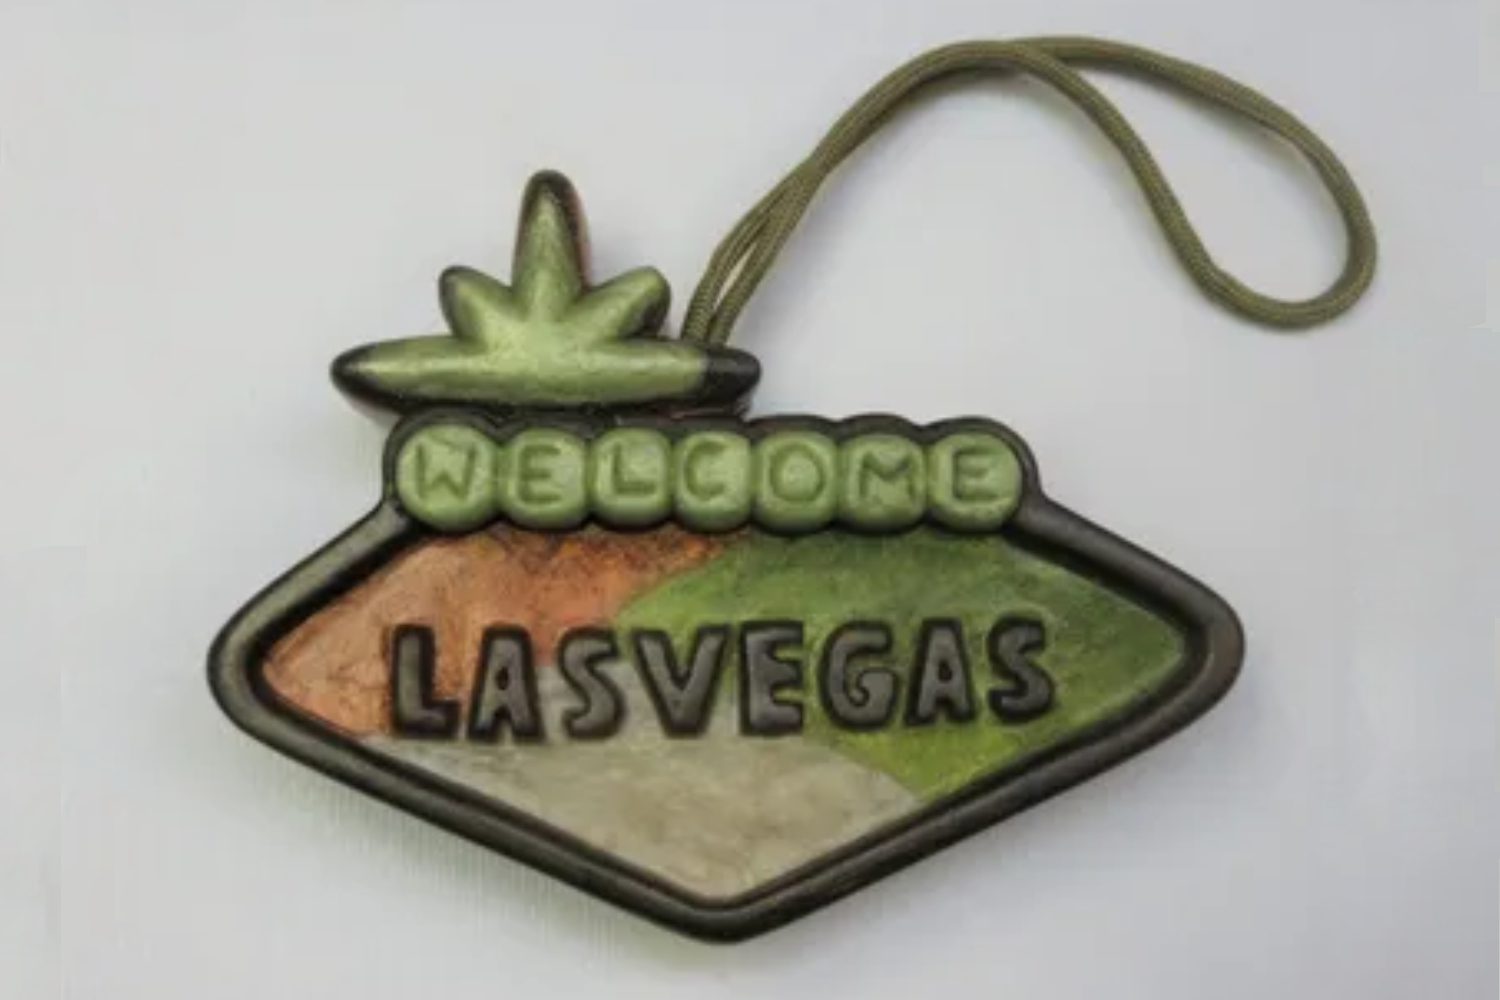 A green and brown sign that says " welcome las vegas ".